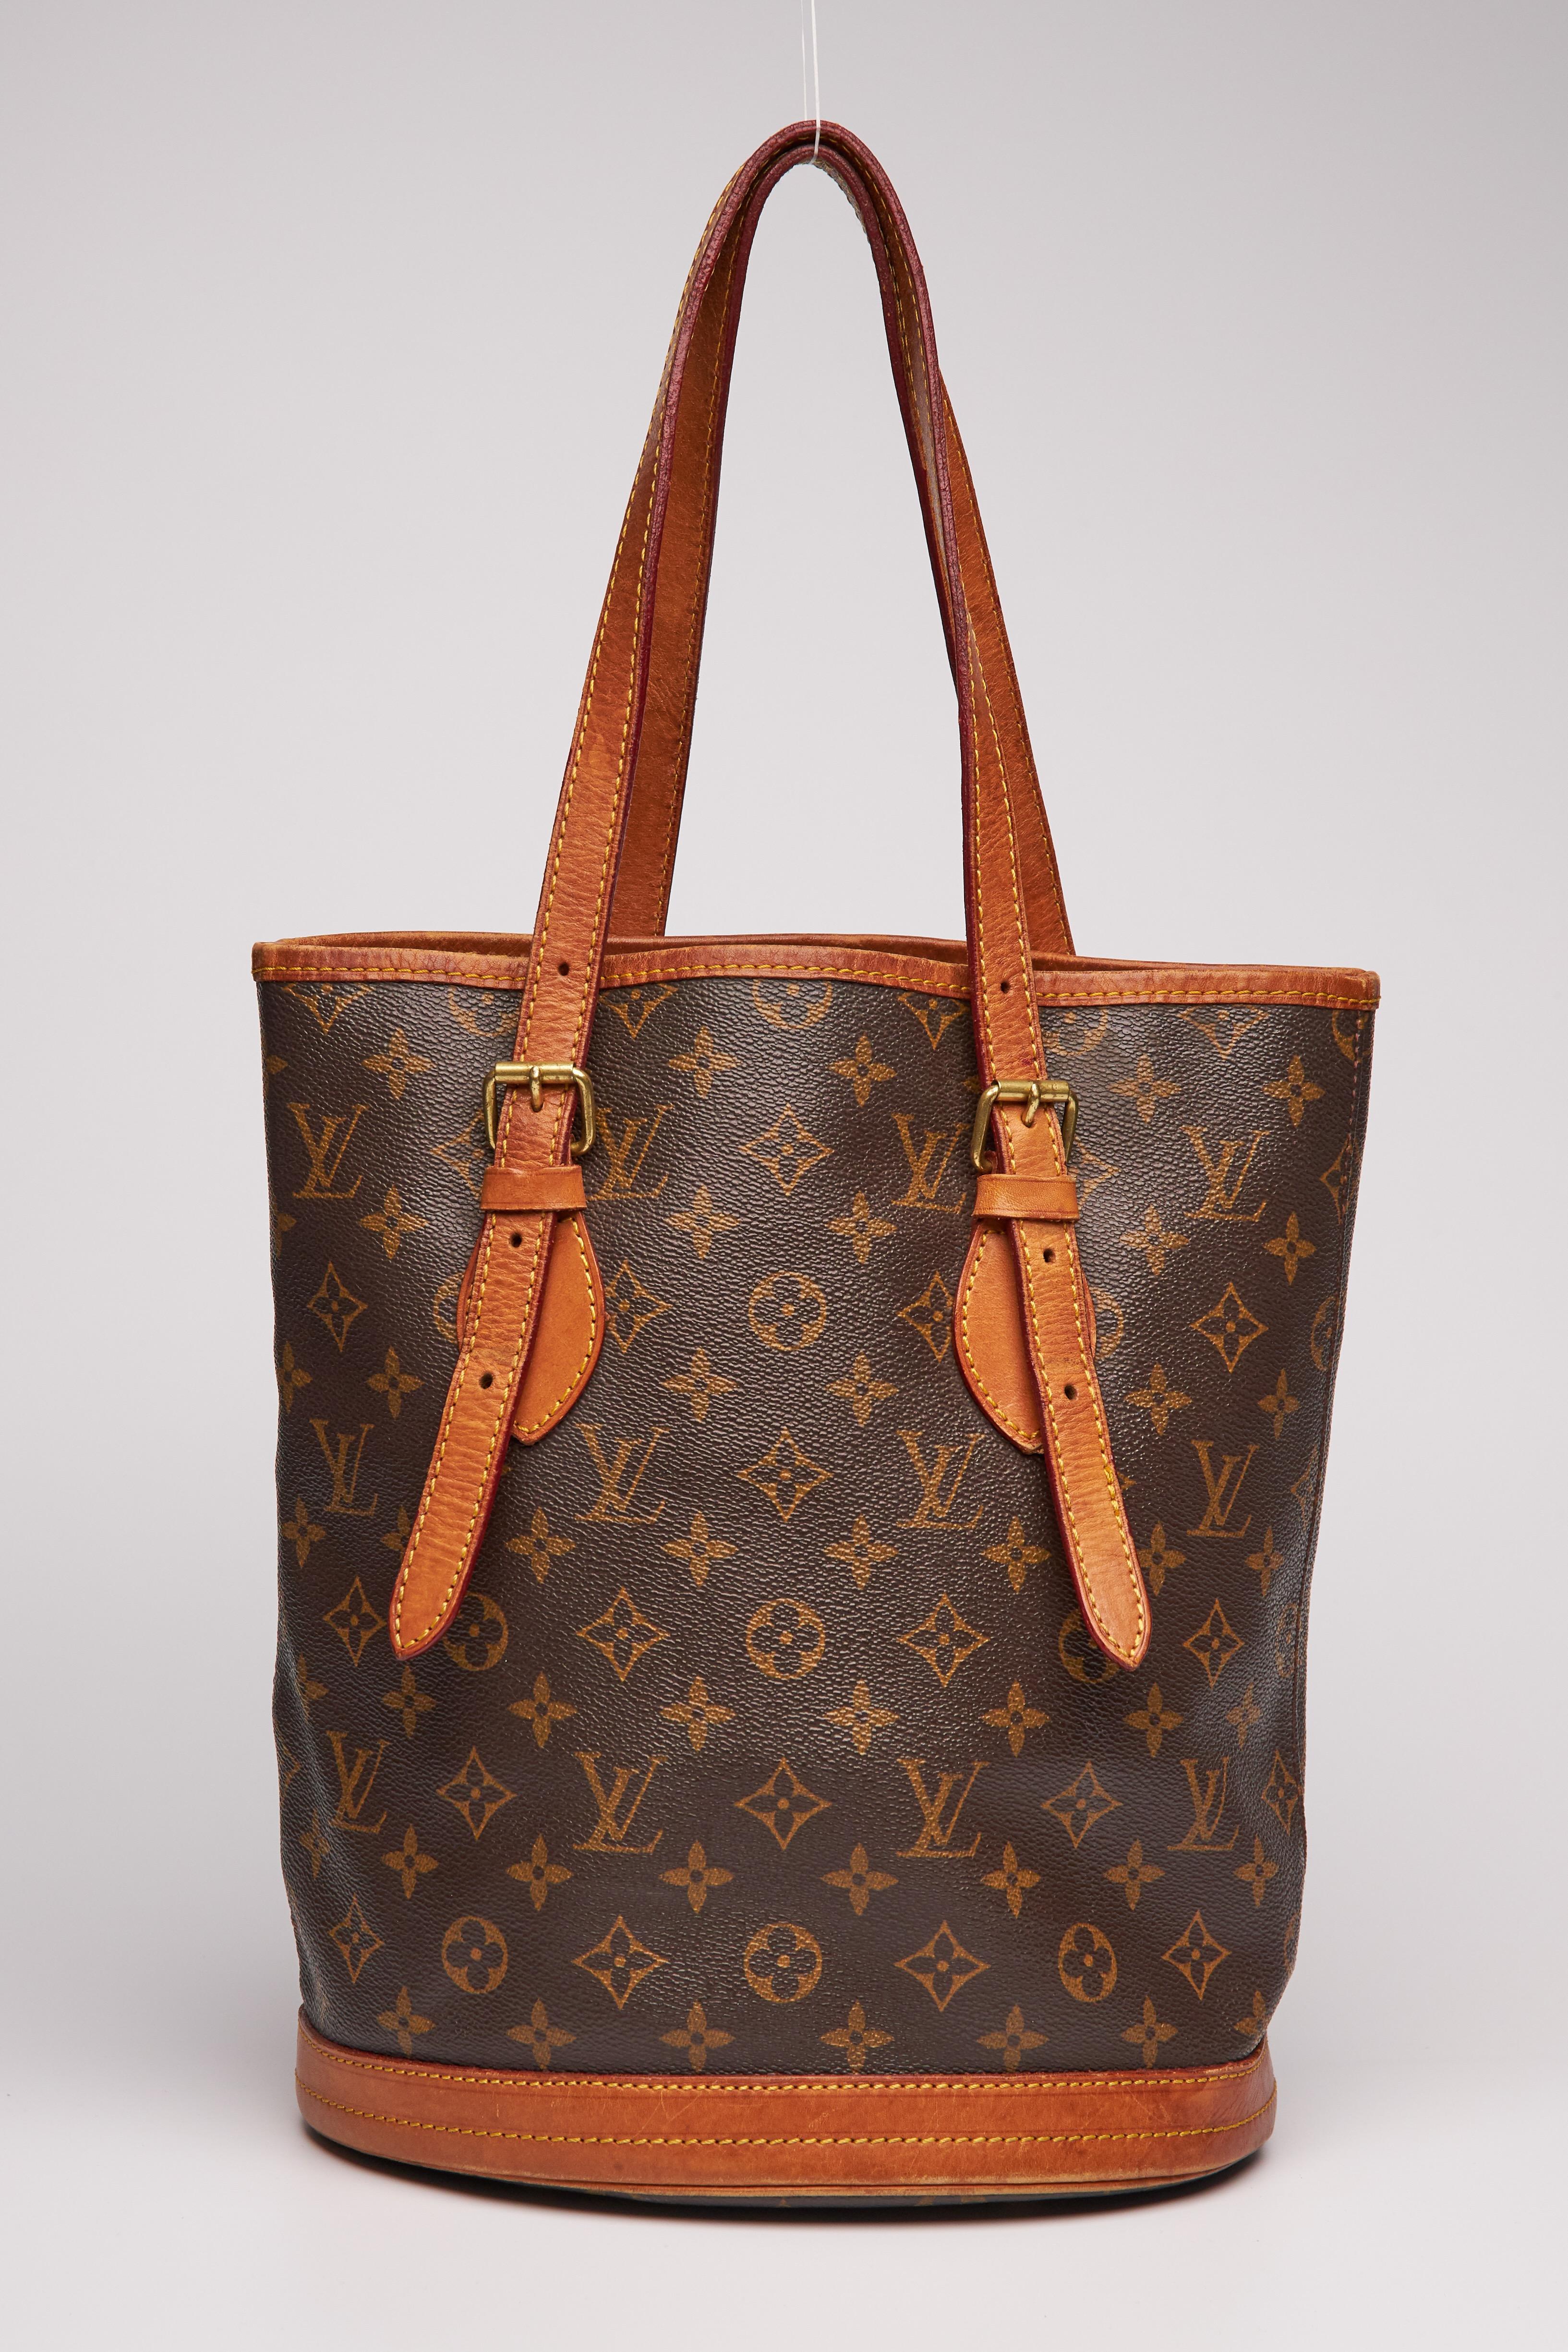 This bag measures 23 cm (10 inch) in height and is a Louis Vuitton classic that is finely crafted of traditional Louis Vuitton monogram print on coated canvas. The bag features natural vachetta leather including trim and tall dual strap handles as